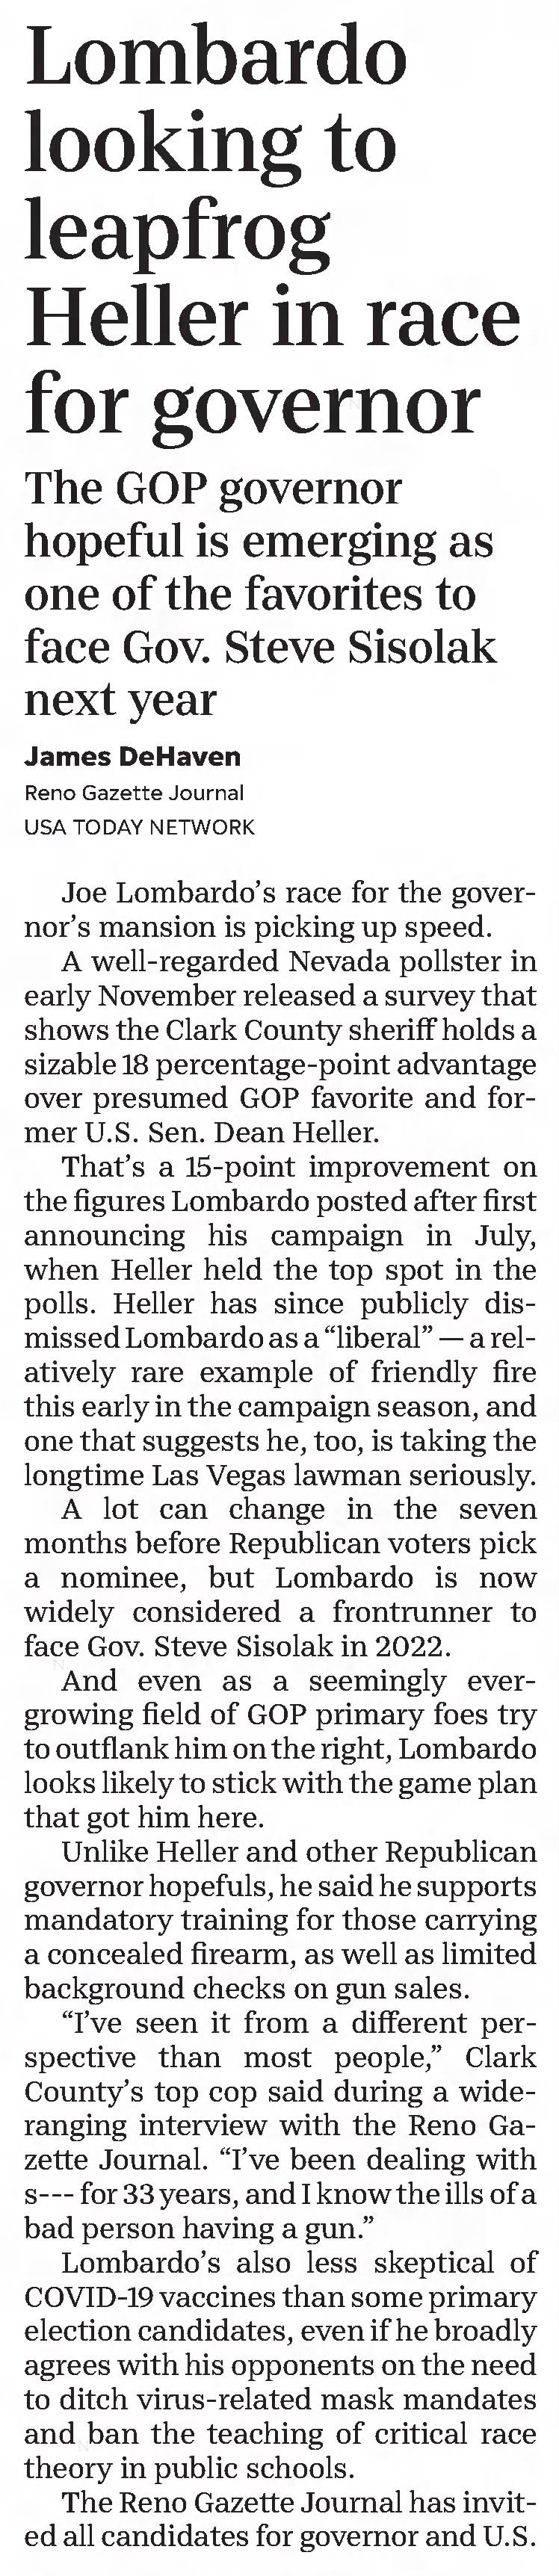 Lombardo looking to leapfrog Heller in race for governor